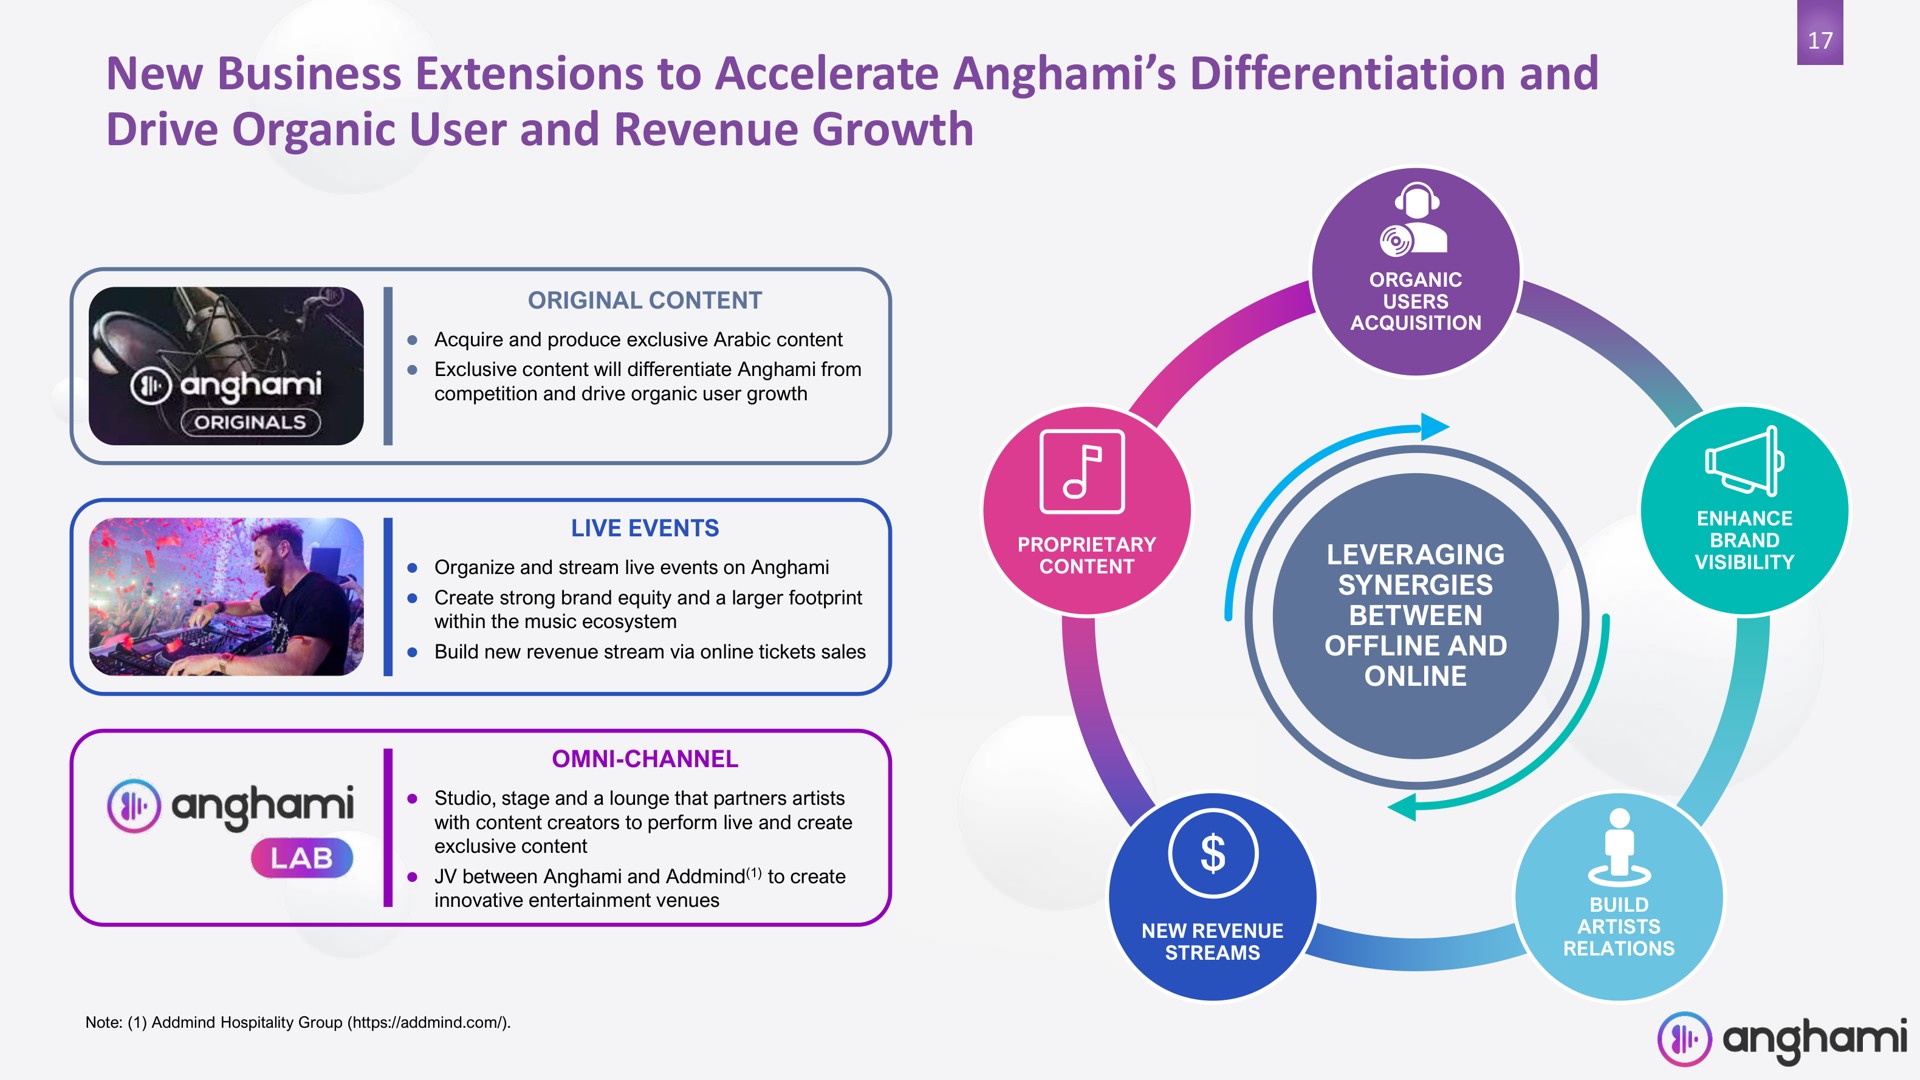 new business extensions to accelerate differentiation and drive organic user and revenue growth i | Anghami